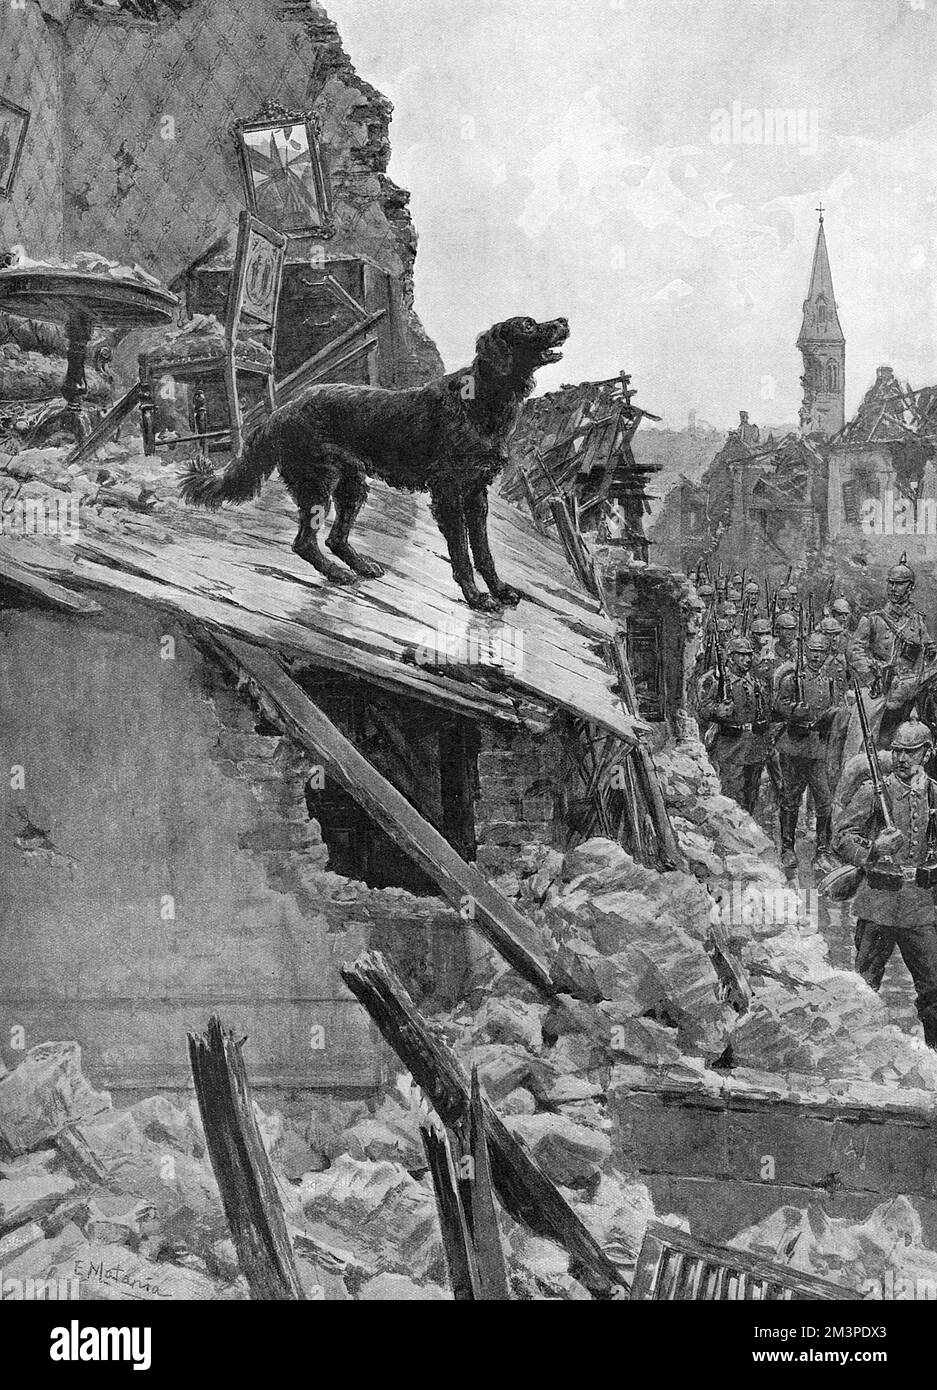 A dog still seeking to defend its former home during the entry of the Germans into Vailly, a small town lying on the Aisne.  Despite the absence of his owners and the wreckage around the dog still howled and kept watch over the few pieces of remaining furniture.     Date: 1915 Stock Photo